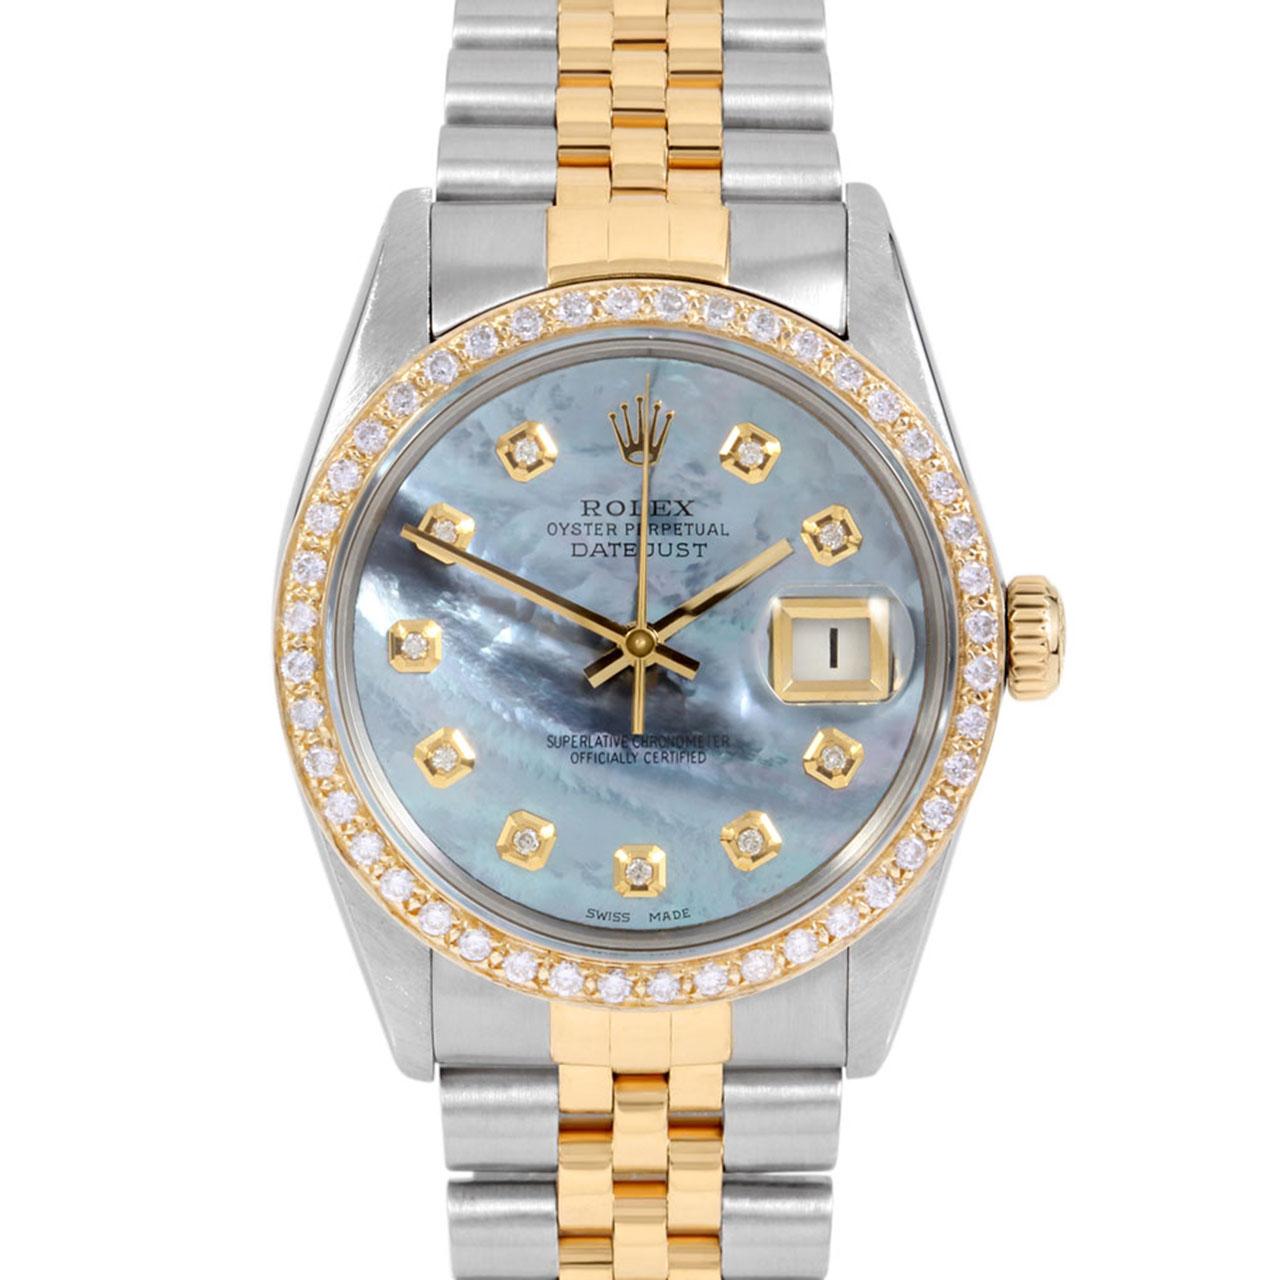 Swiss Wrist - SKU 16013-BLMOP-DIA-AM-BDS-JBL

Brand : Rolex
Model : Datejust Ref# 16013 - Plastic Quickset Model 
Gender : Mens
Metals : 14K Yellow Gold/ Stainless Steel
Case Size : 36 mm
Dial : Custom Blue Mother Of Pearl Diamond Dial (This dial is